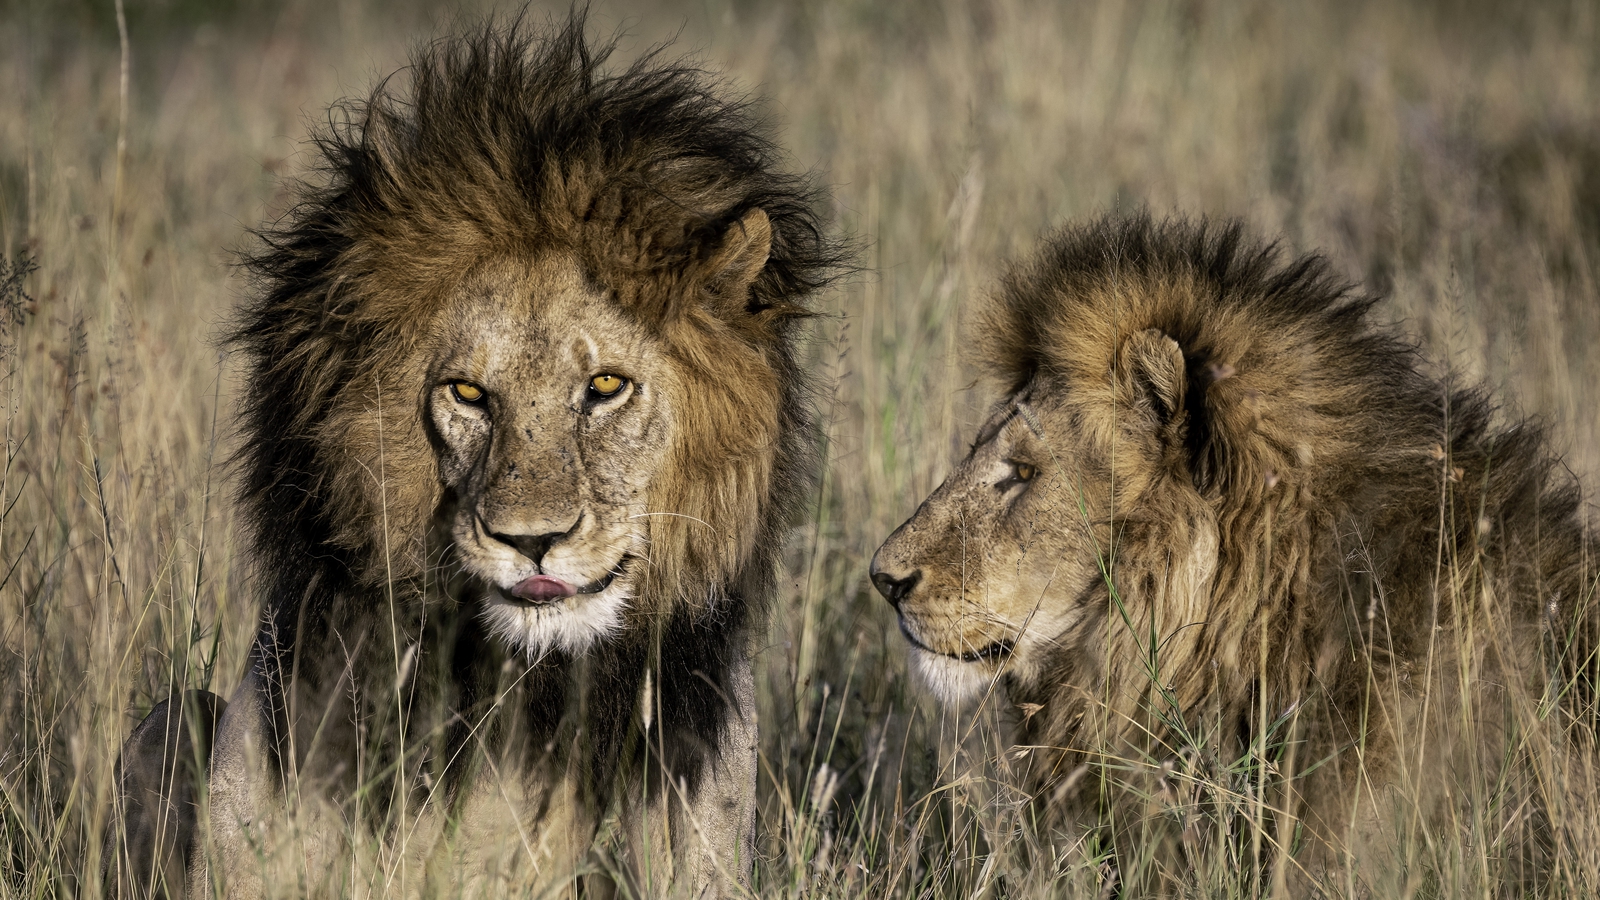 Serengeti #39 s lion king killed by younger rivals